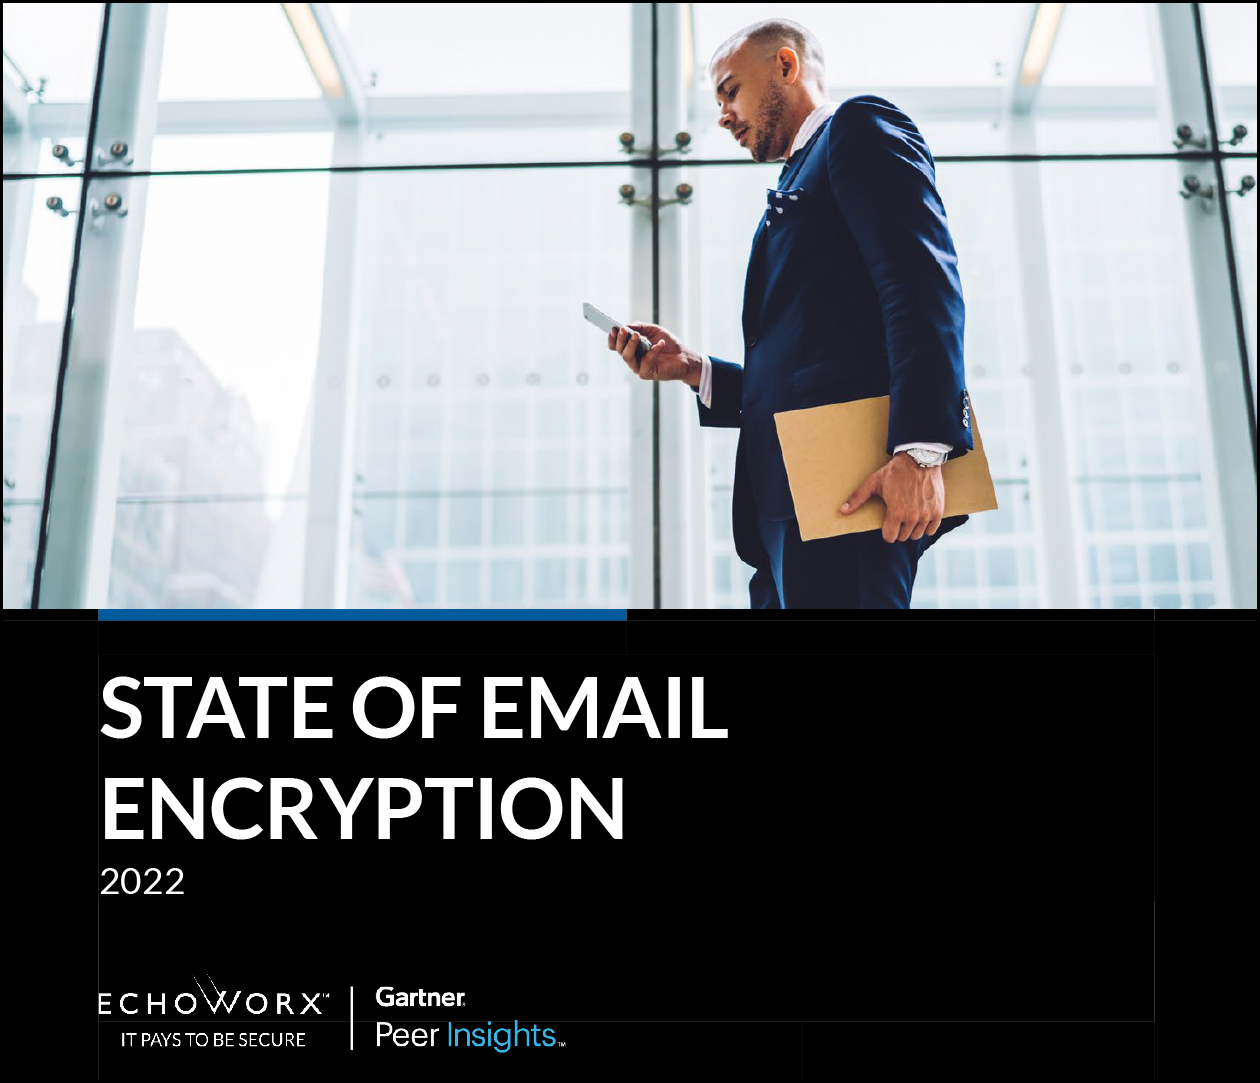 http://Echoworx%20and%20Gartner%20Peer%20Insights,%20State%20of%20Email%20Encryption%202022